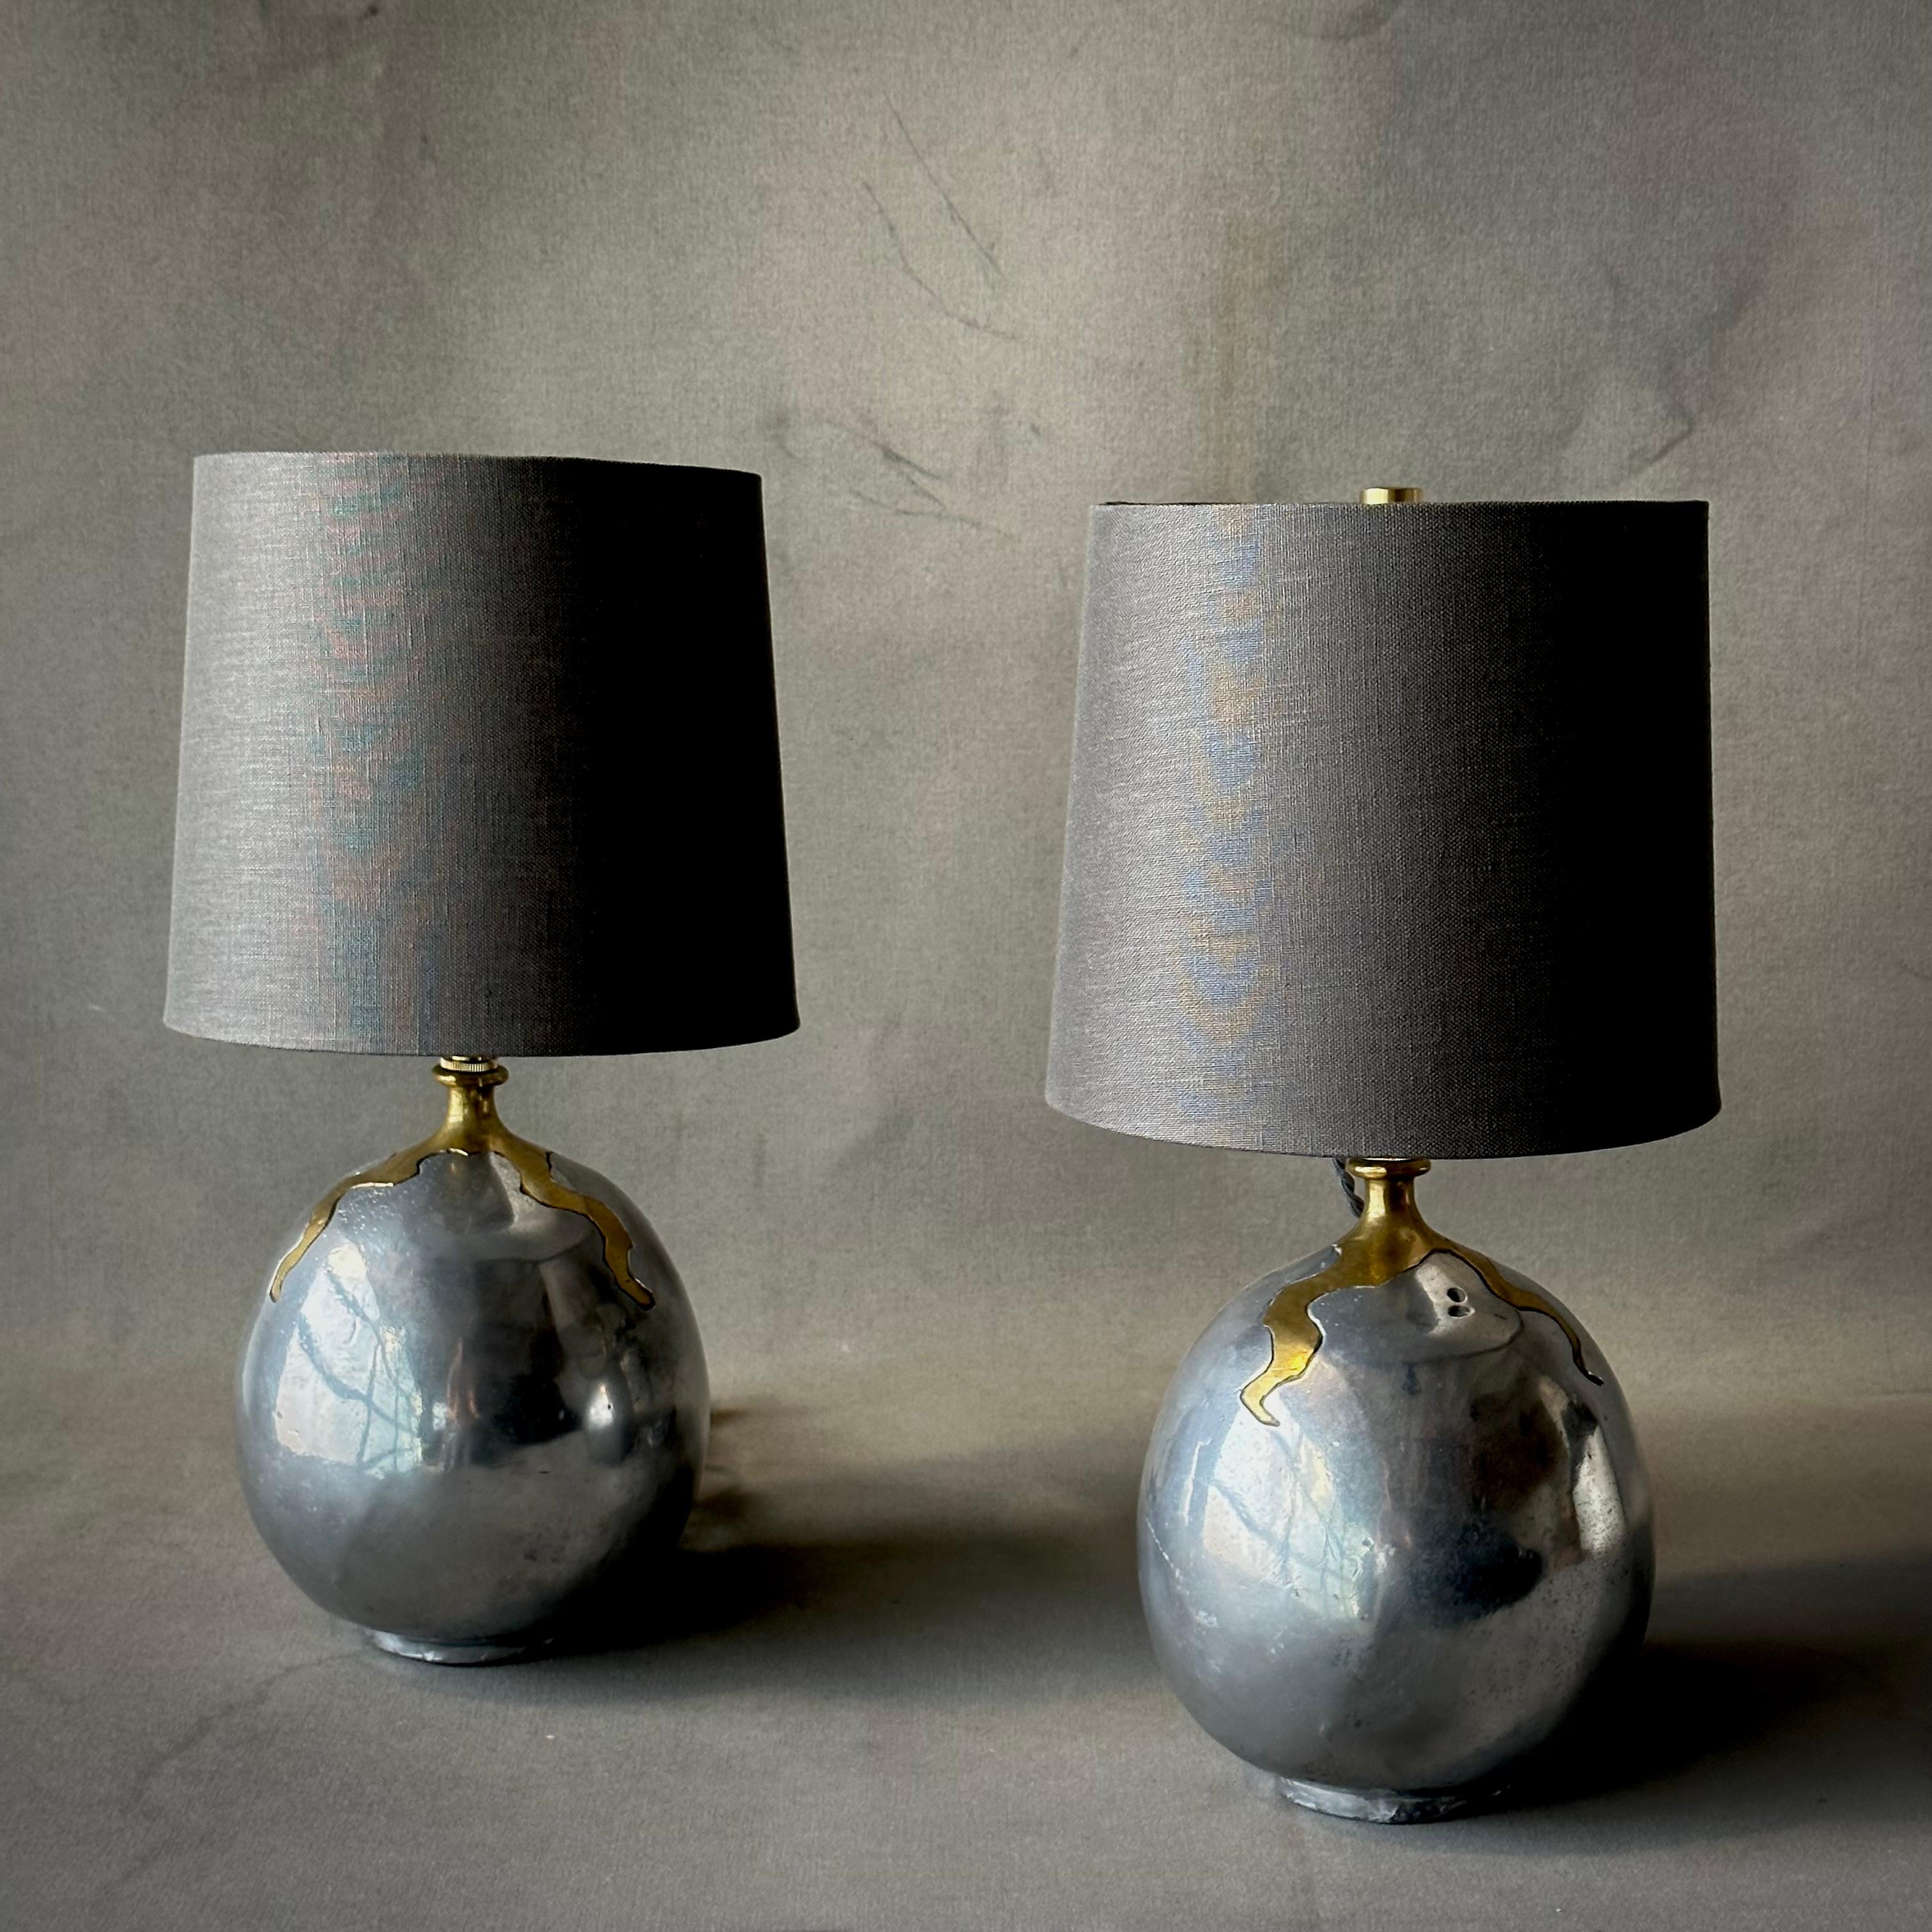 Pair of 1970s hand-cast brutalist aluminum table lamps by David Marshall. Strong yet organic, these versatile light fixtures are evocative of Elsa Peretti and Brancusi. Includes contemporary custom Belgian linen grdrum shades.

Spain, circa